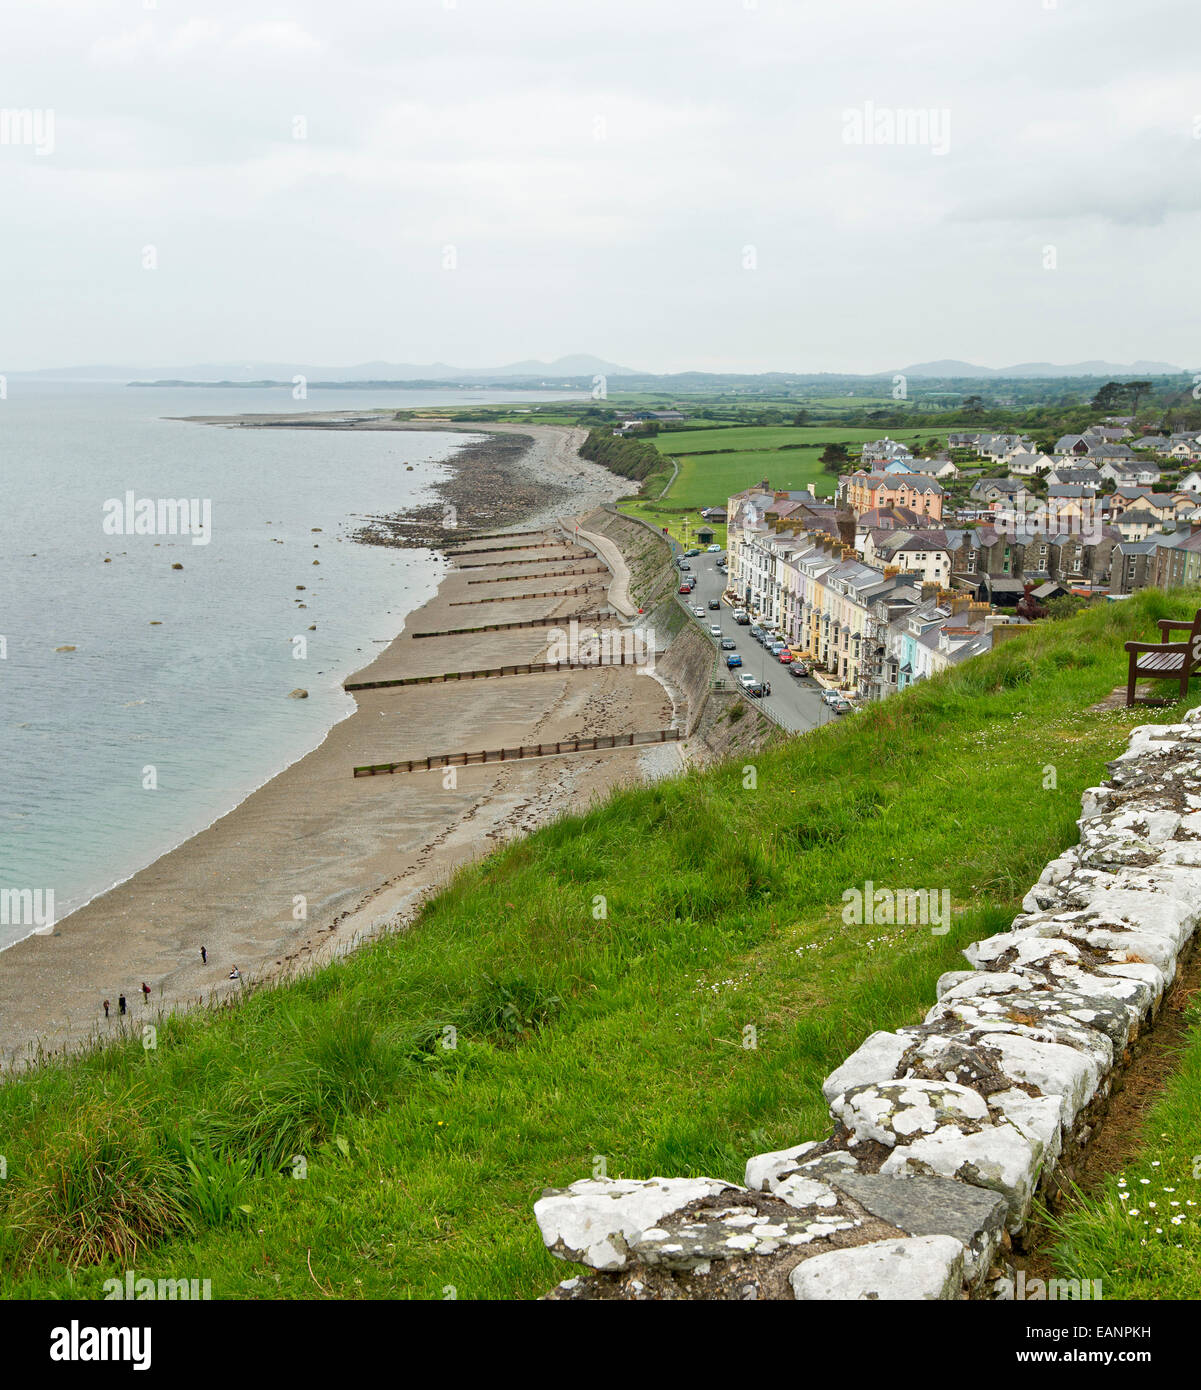 View, from hilltop castle, of historic Welsh town of Criccieth with row of houses by sandy beach of Cardigan Bay & green fields Stock Photo